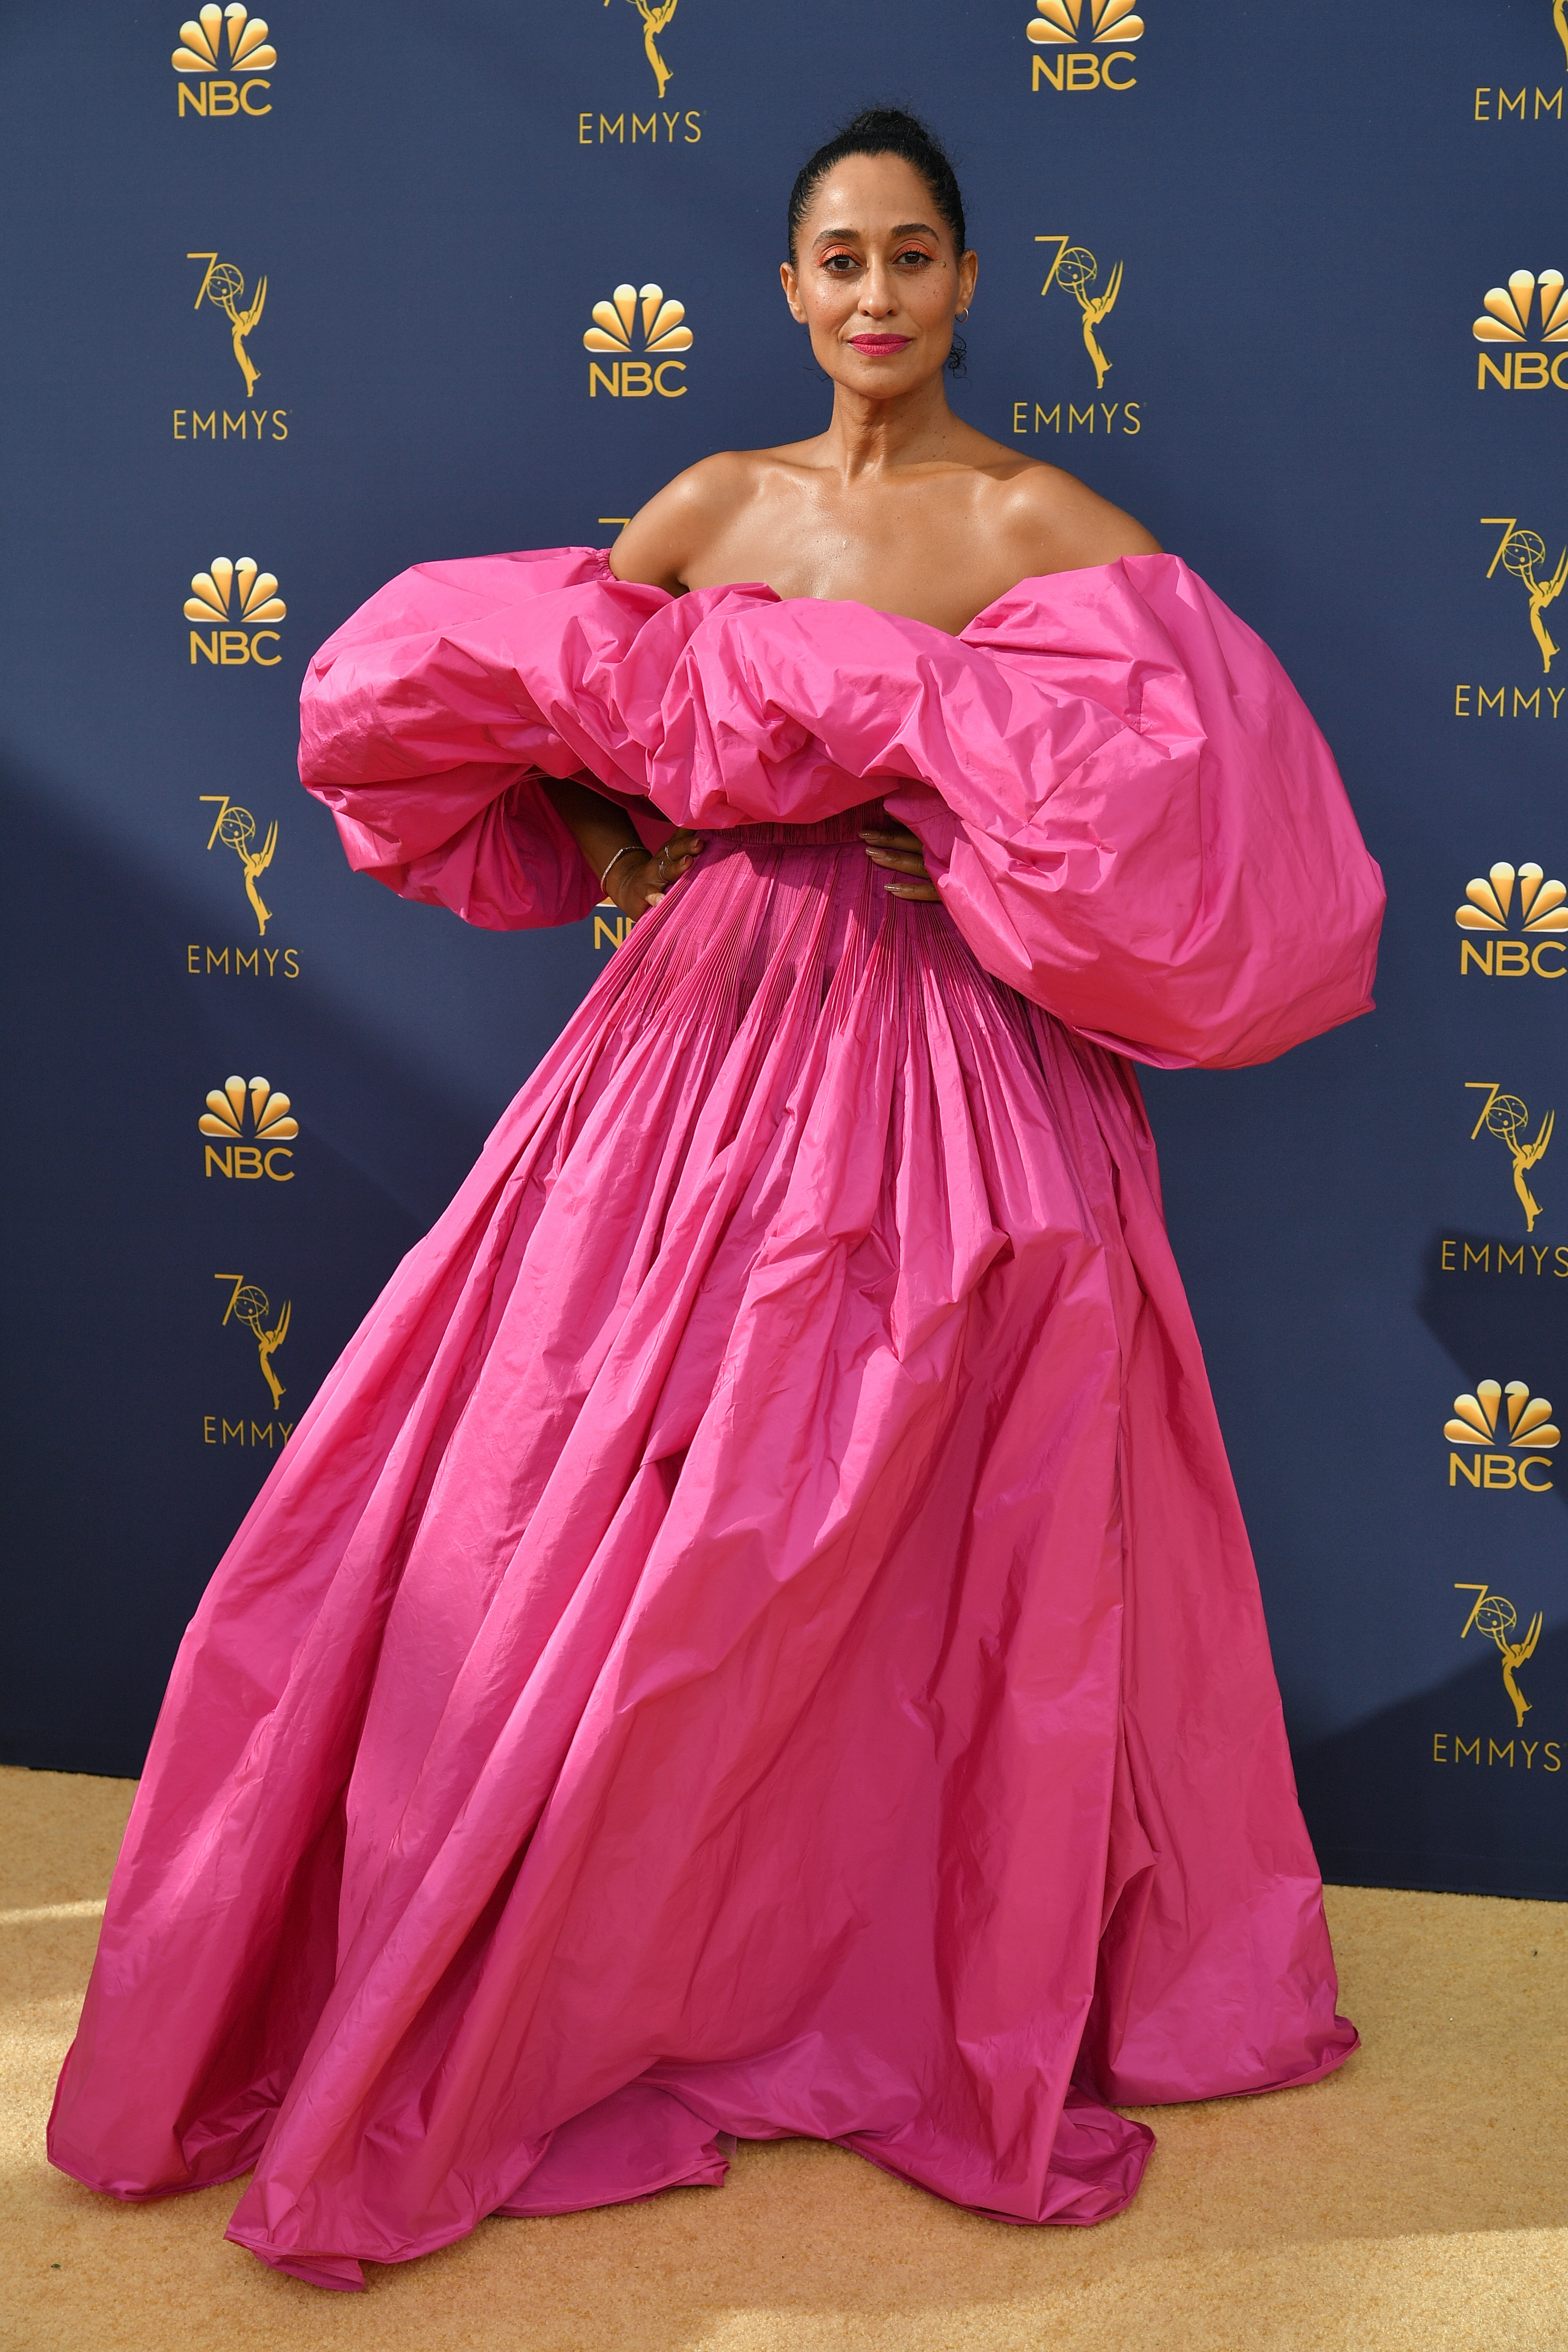 Fashion hits and misses from the 2018 Primetime Emmy Awards